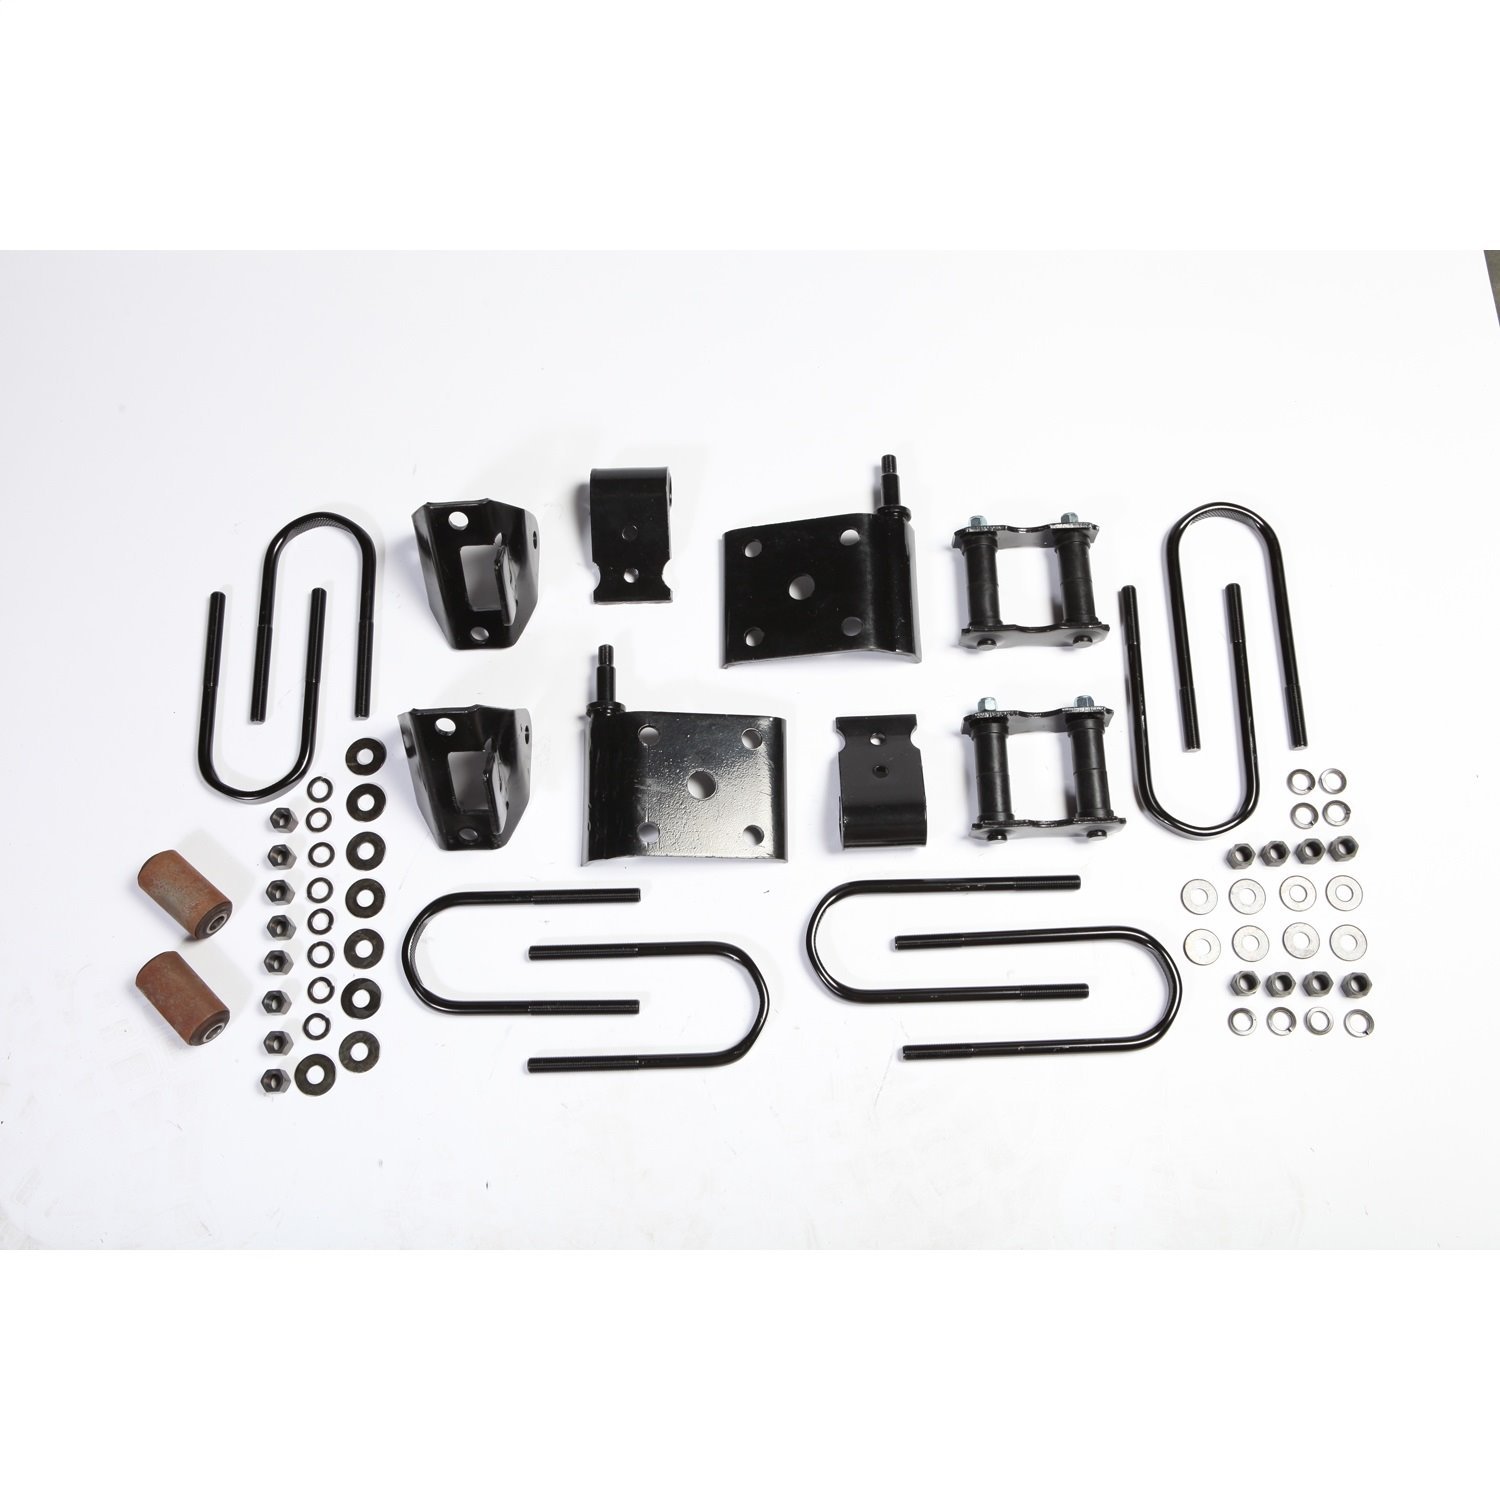 This rear leaf spring mounting kit from Omix-ADA fits 76-86 Jeep CJ7 and CJ8. Includes everything yo